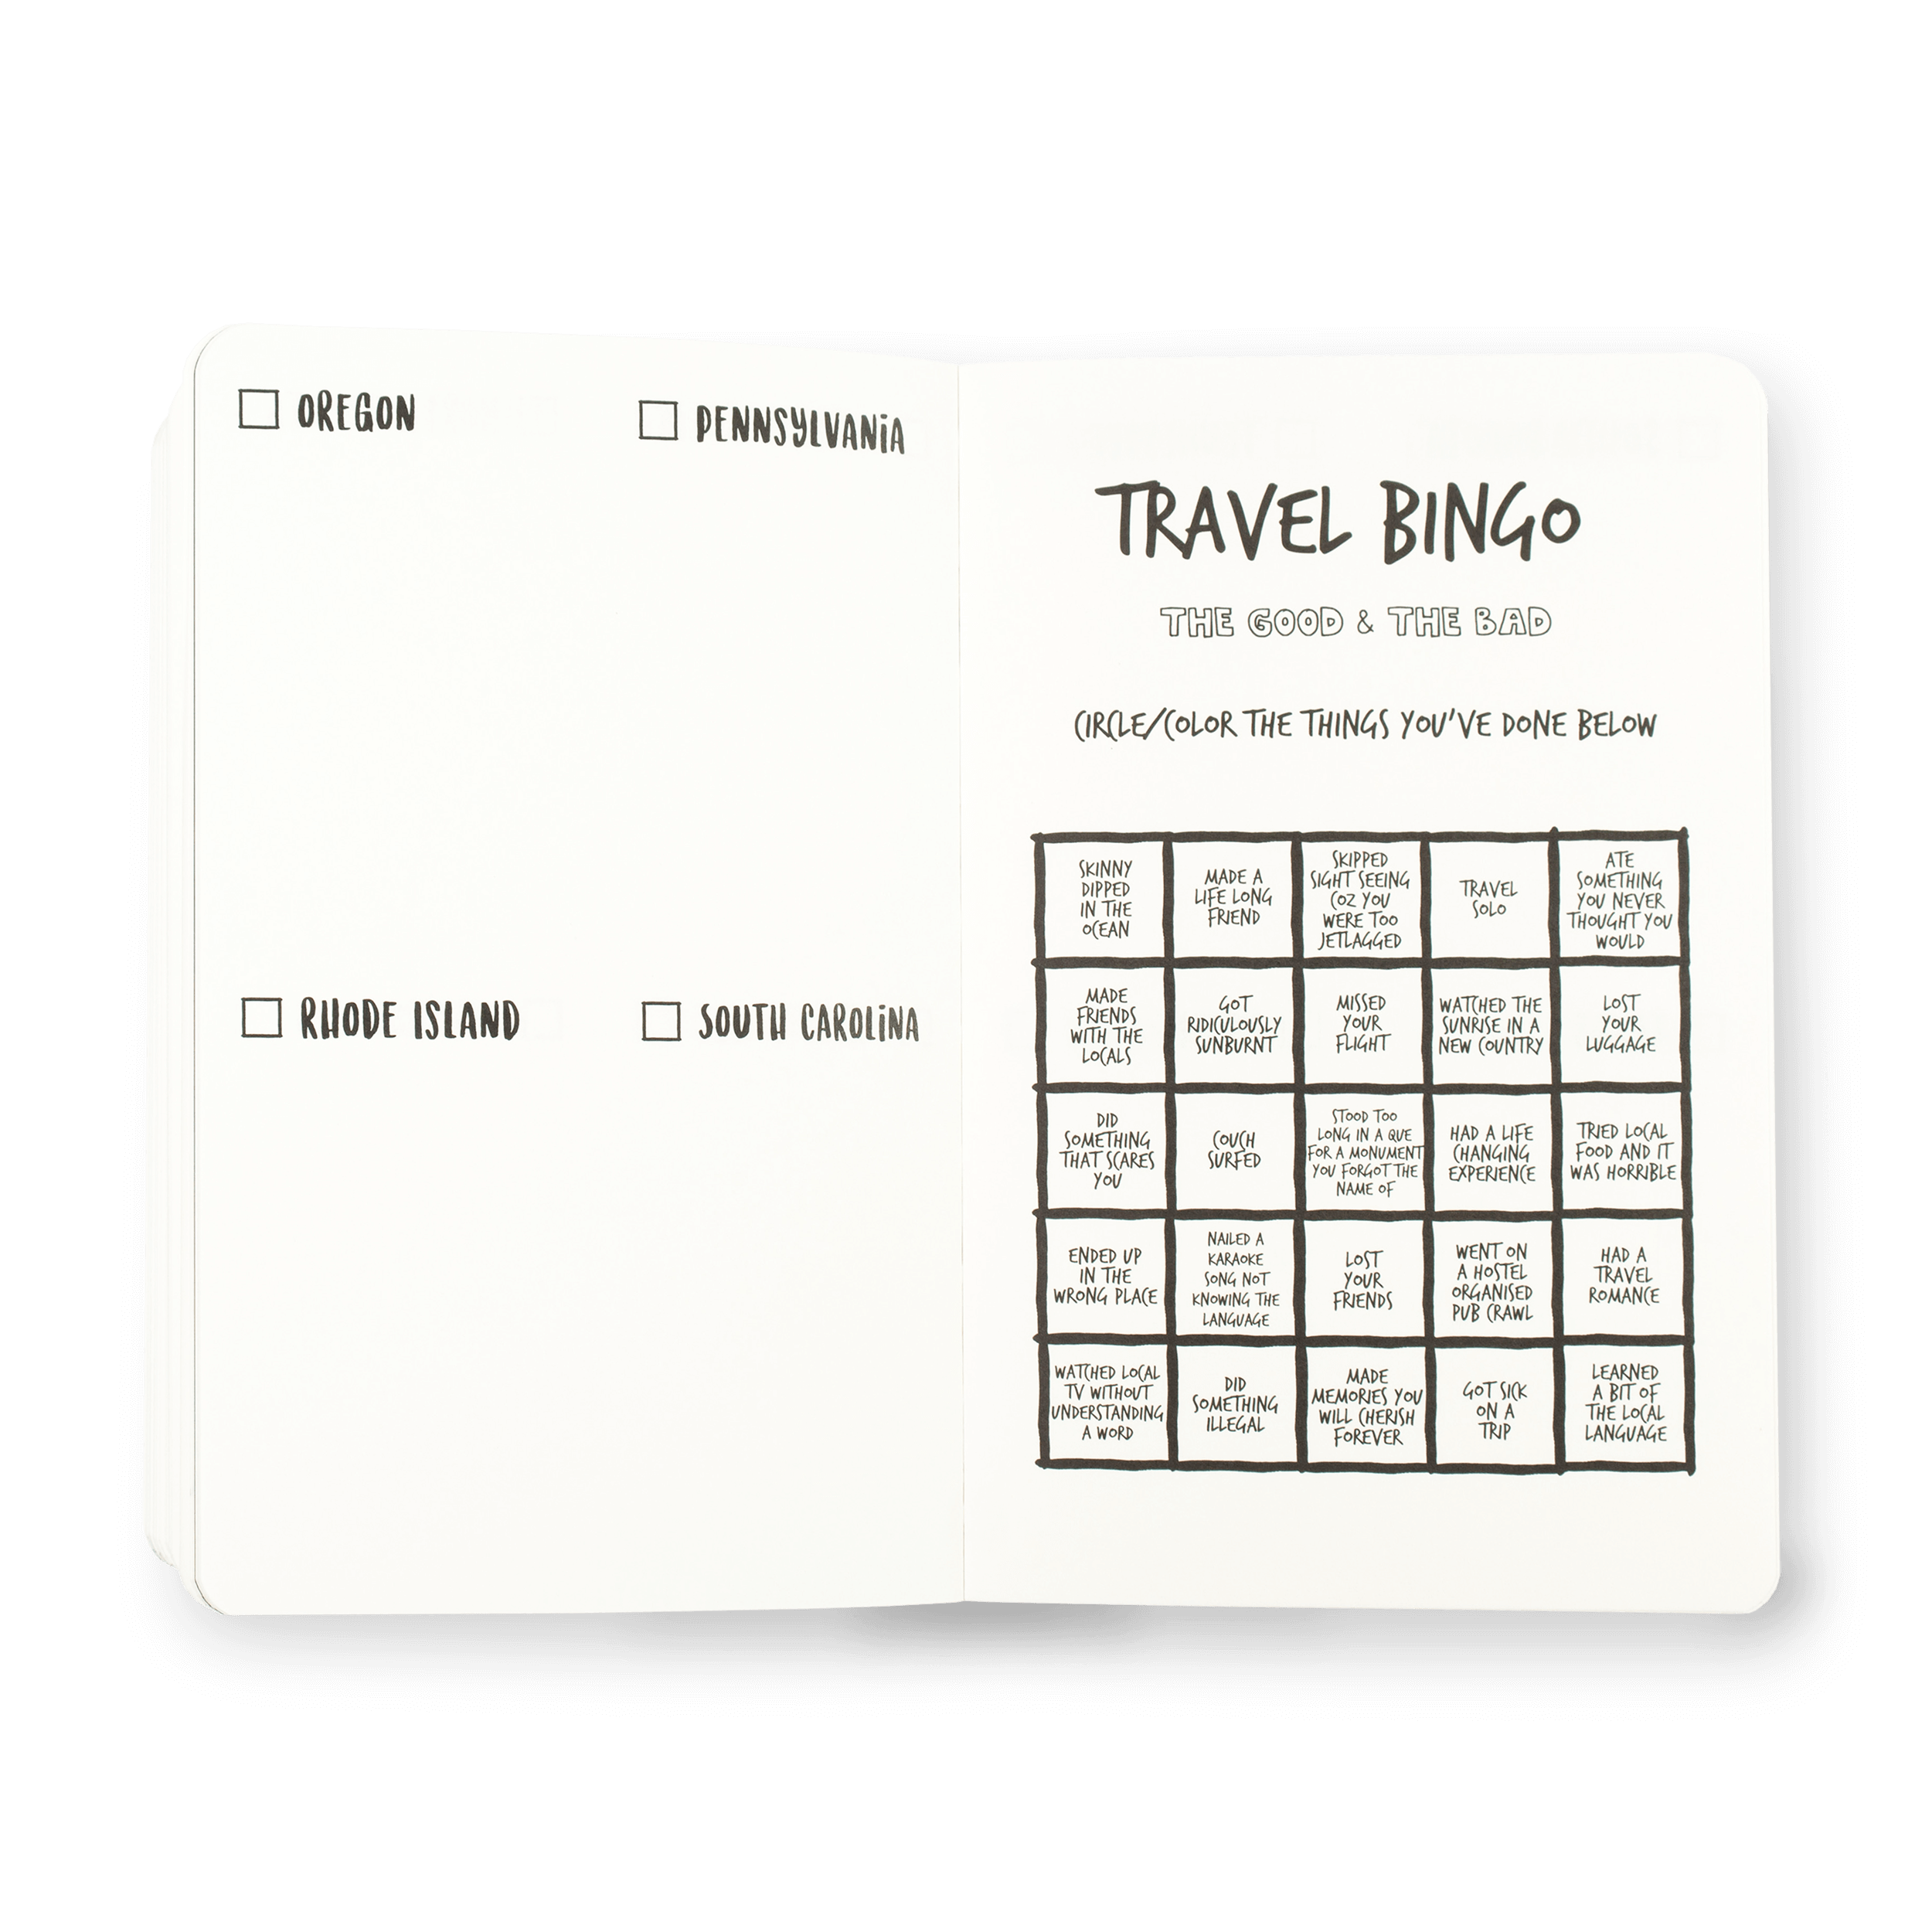 The Adventure Book pages travel bingo 50 United States of America USA Travel Journal